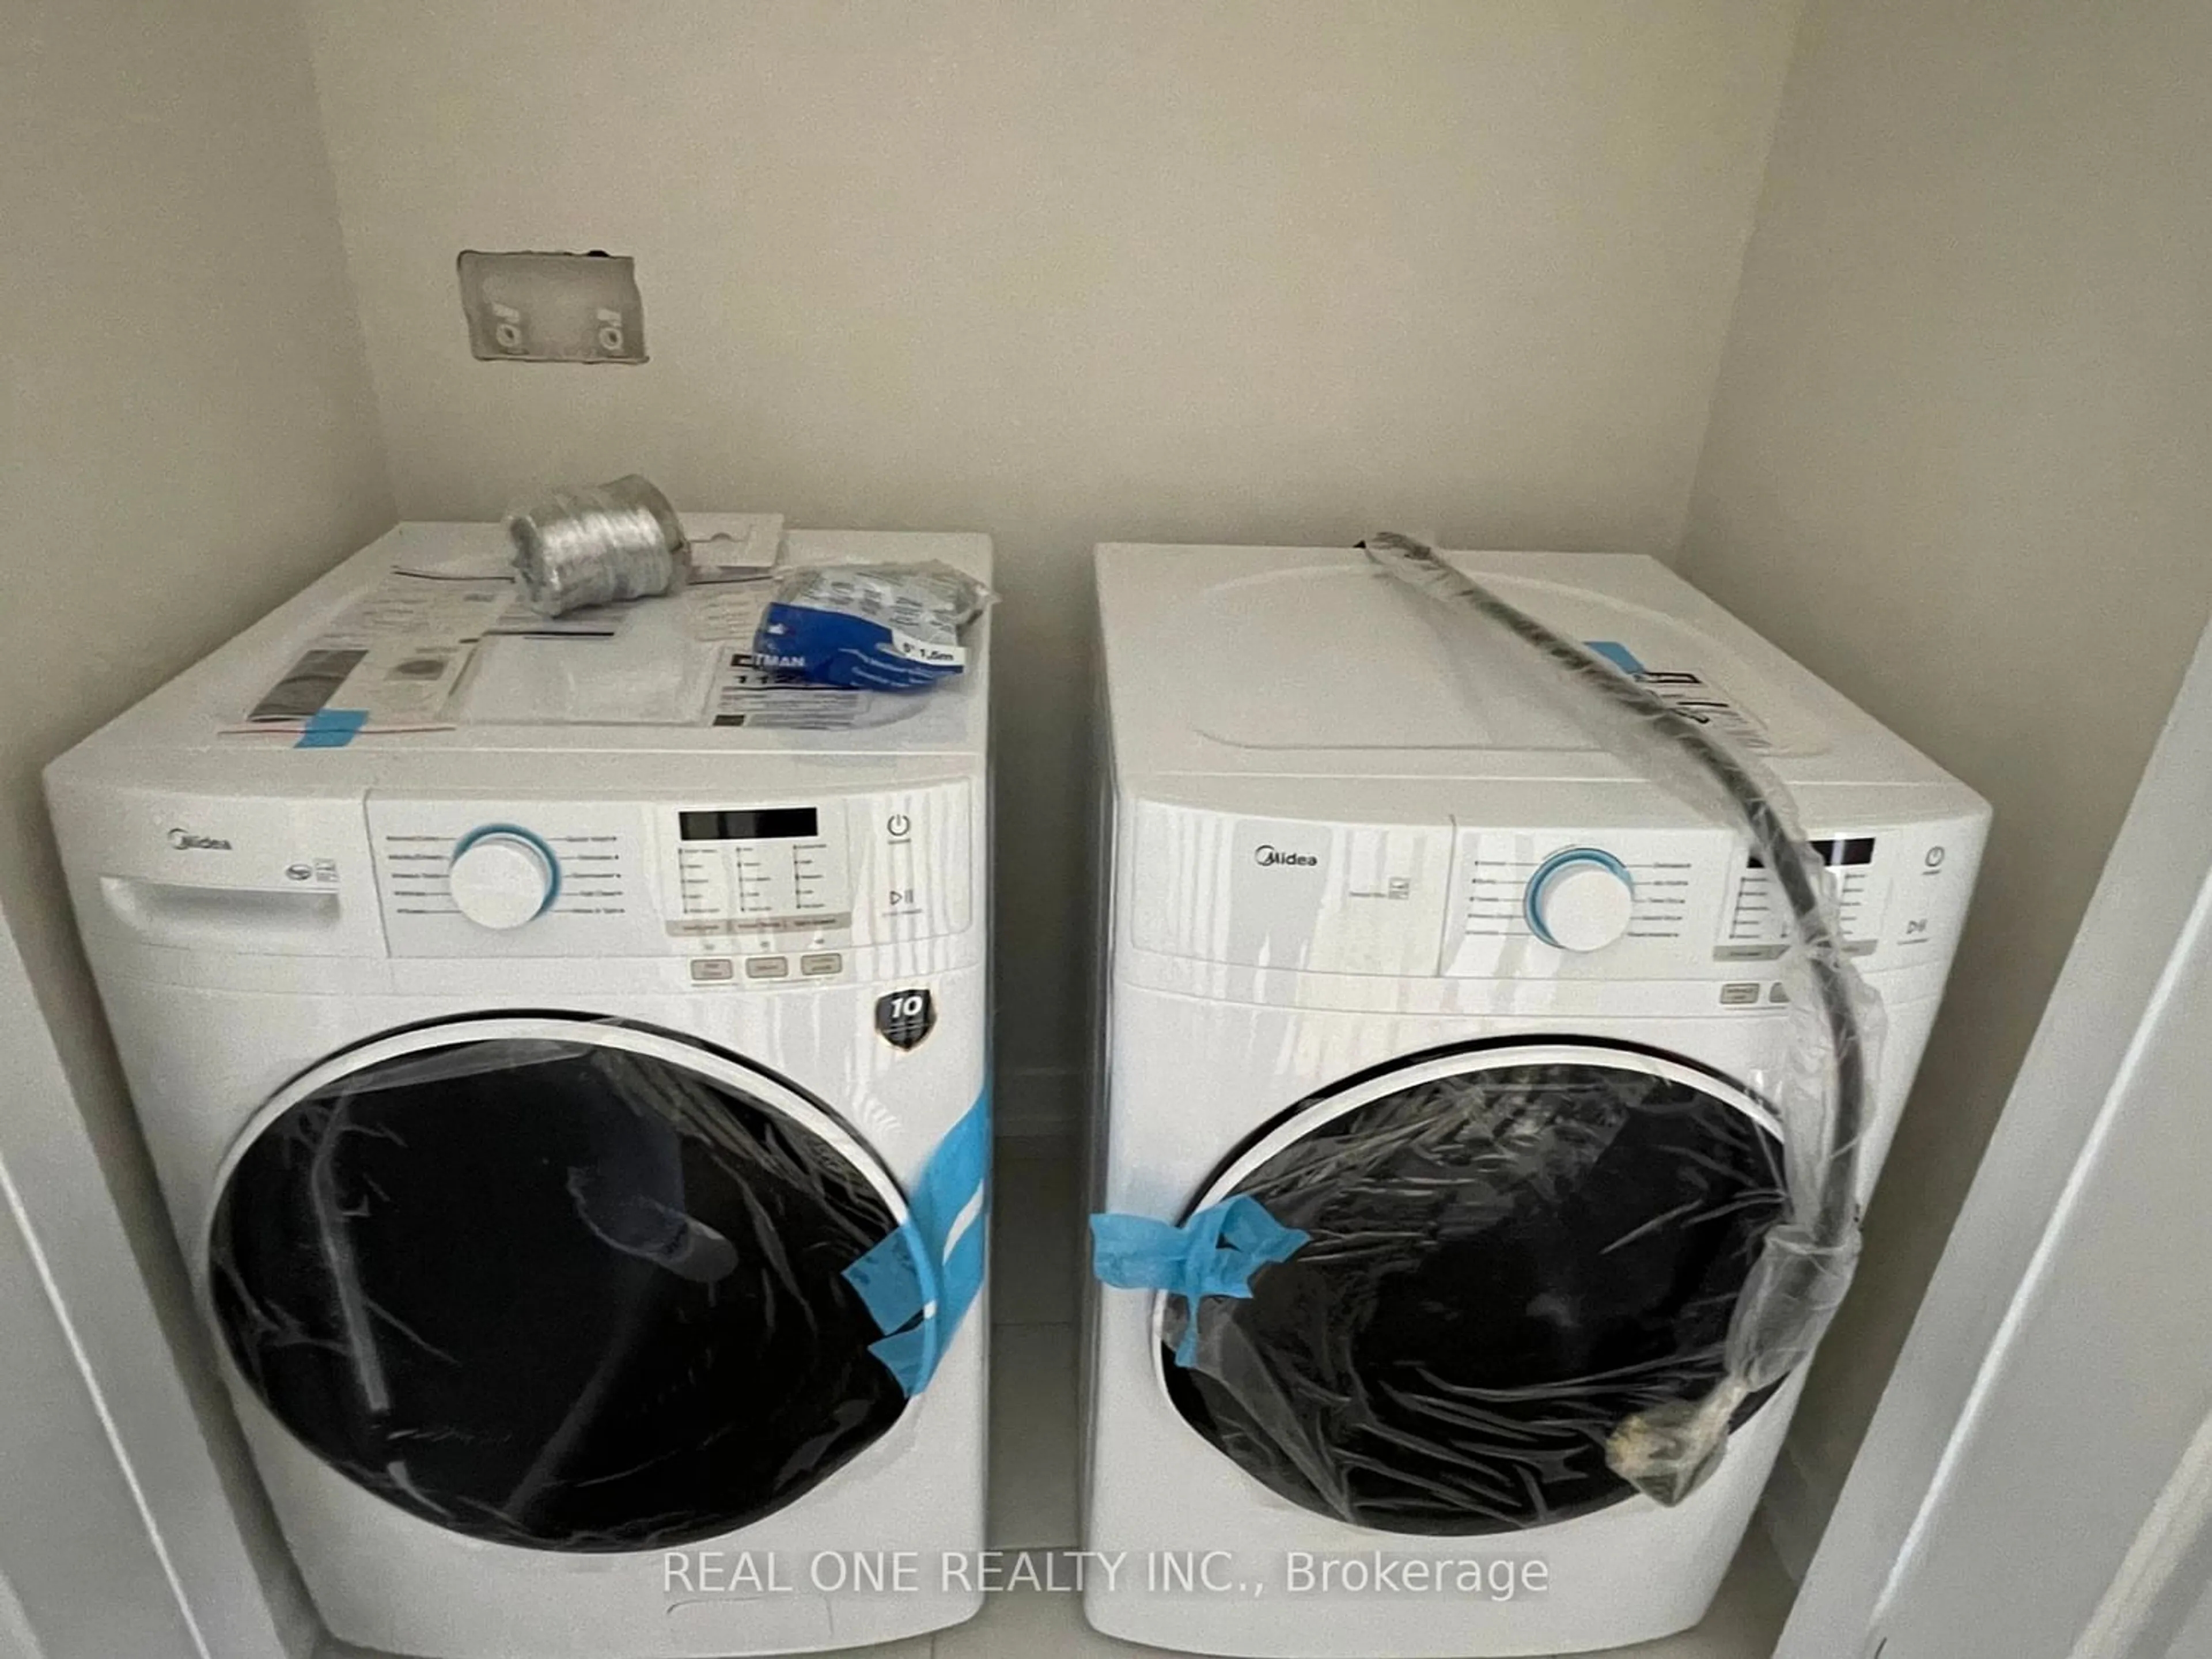 Washer and dryer for 128 Credit Lane, Richmond Hill Ontario L4E 1G9